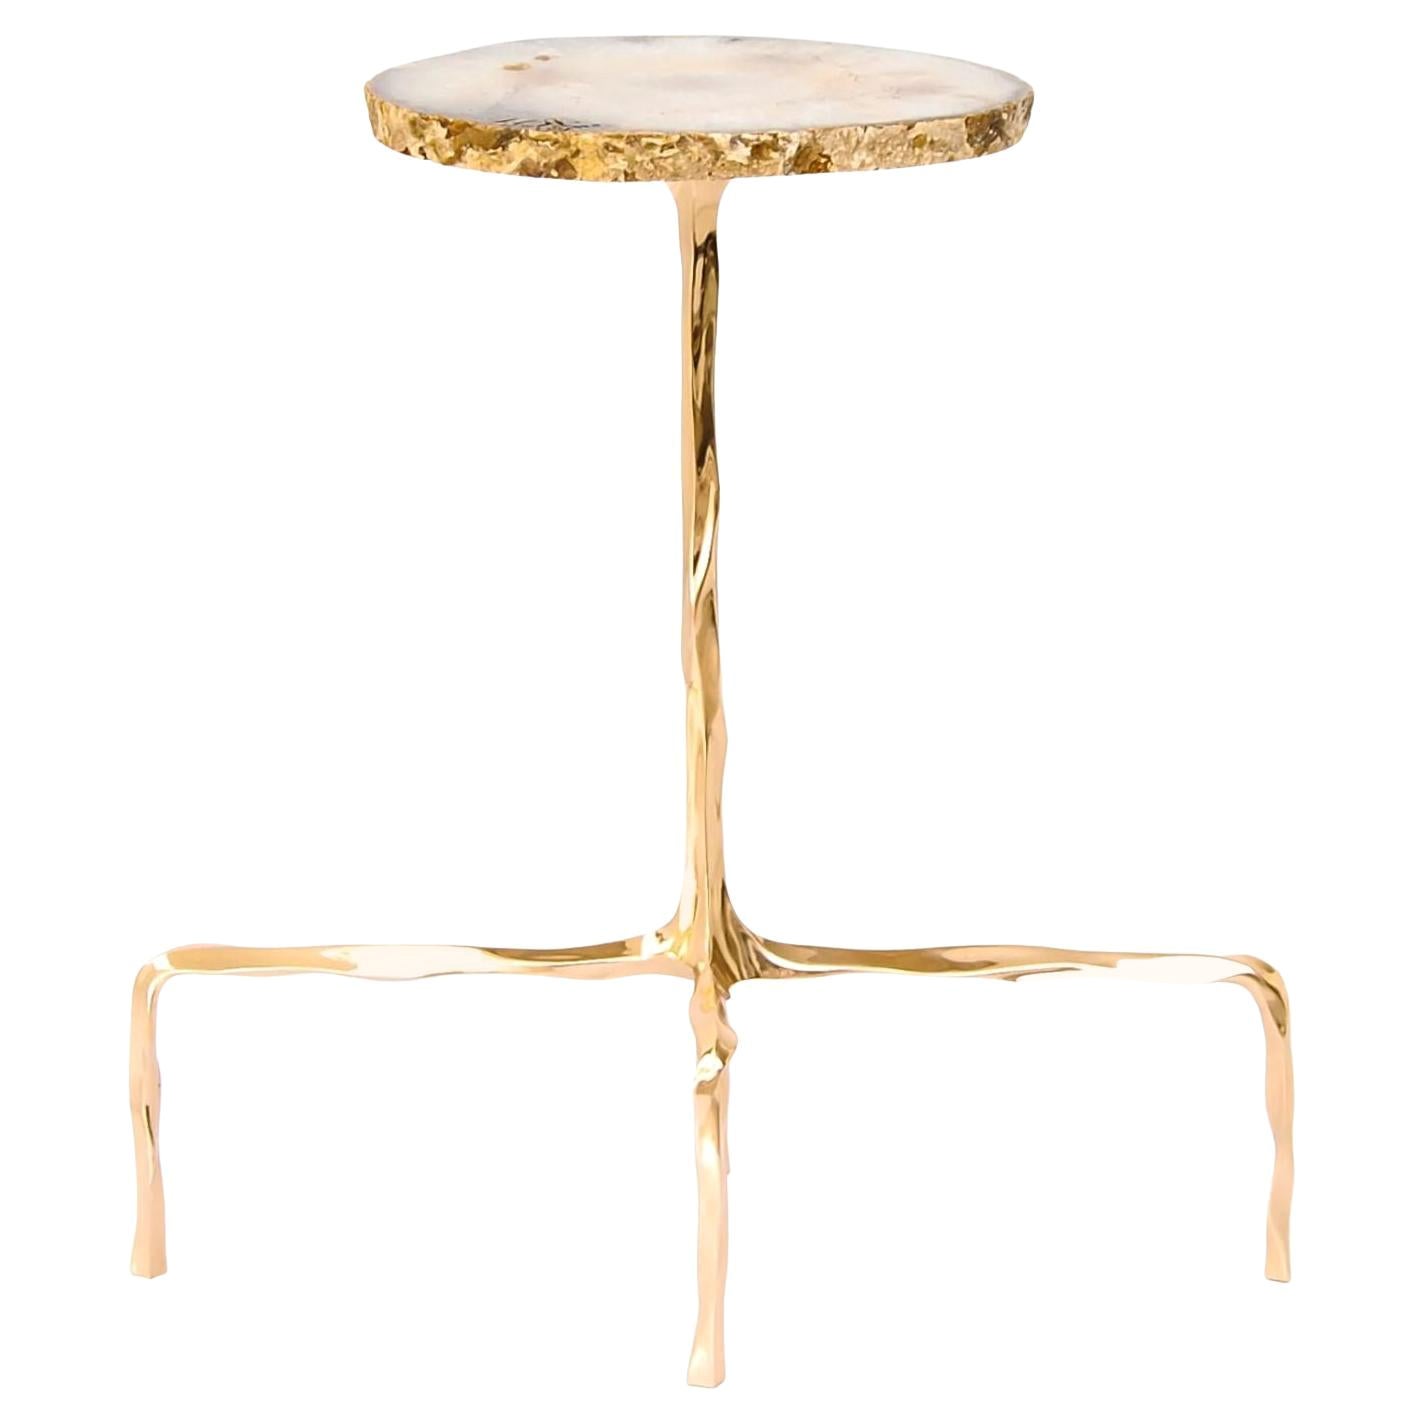 Presley Drink Table with Agate Top by Fakasaka Design For Sale